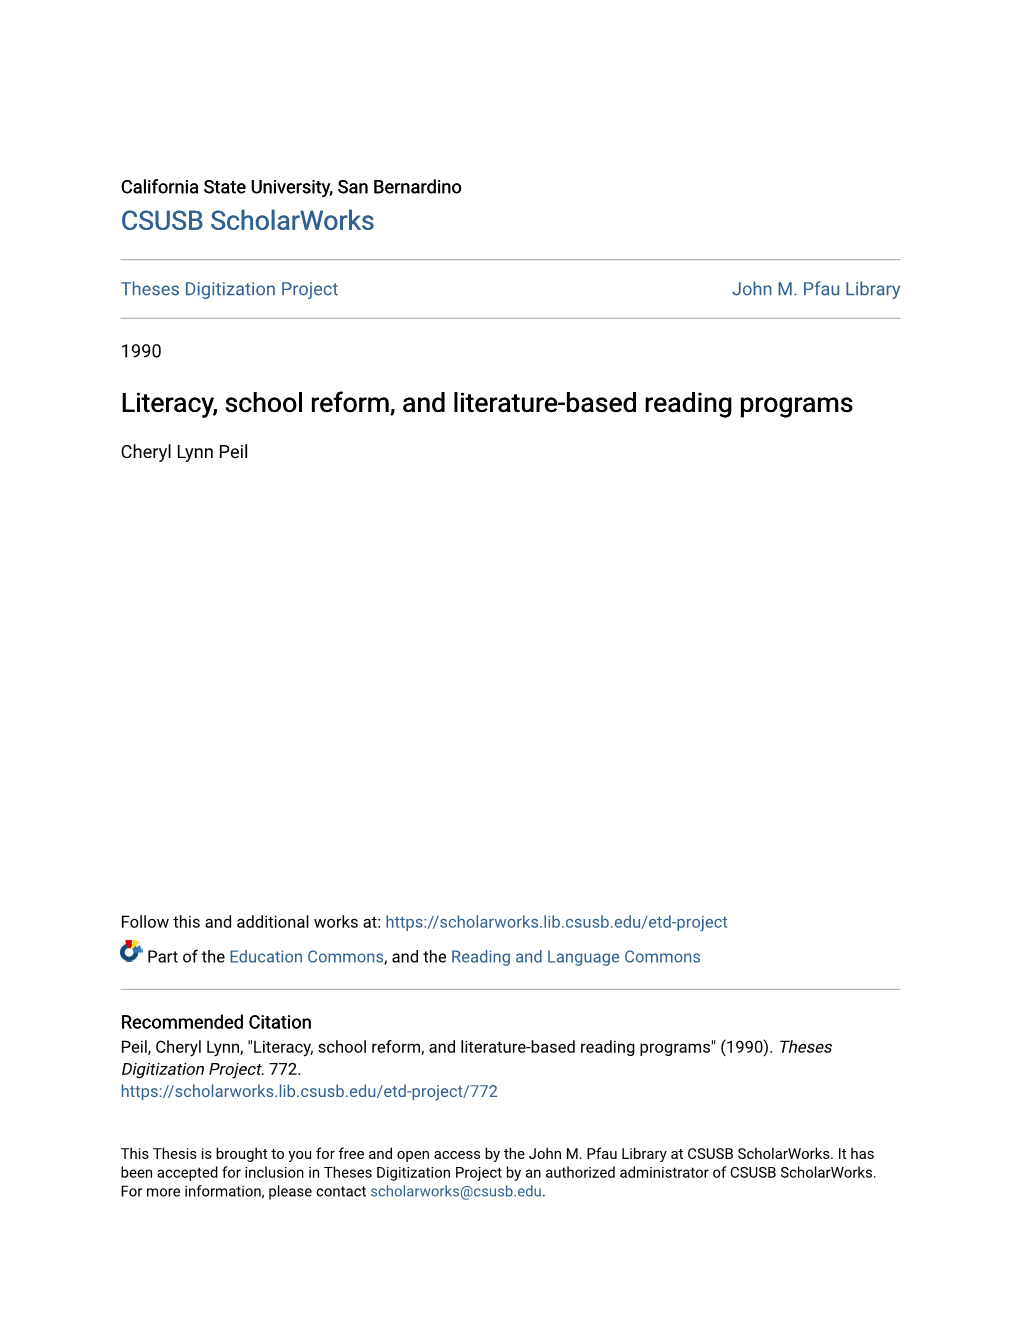 Literacy, School Reform, and Literature-Based Reading Programs